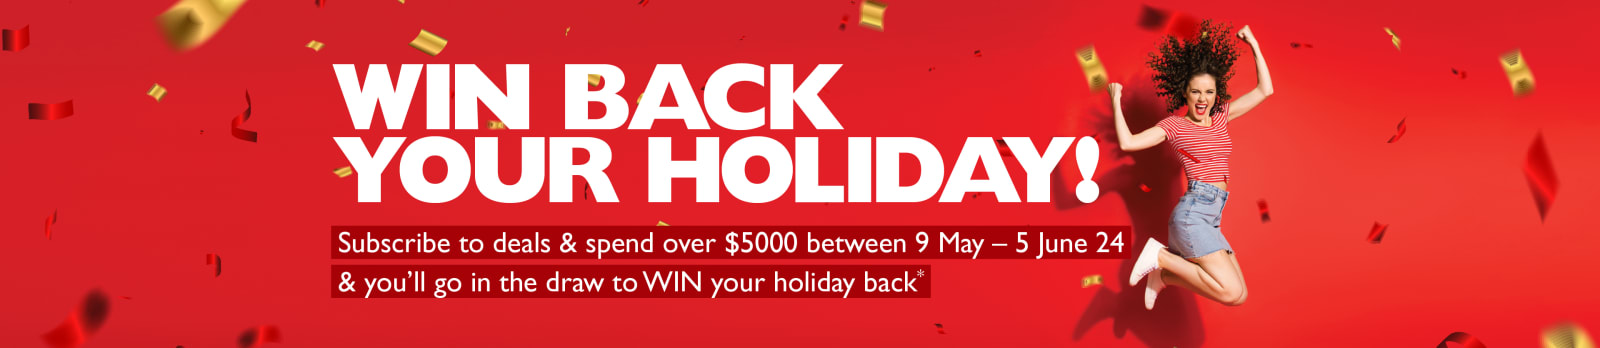 Win back your holiday! | Subscribe to deals & spend over $5,000 between 9th May - 5th June 2024 & you'll go in the draw to WIN your holiday back*